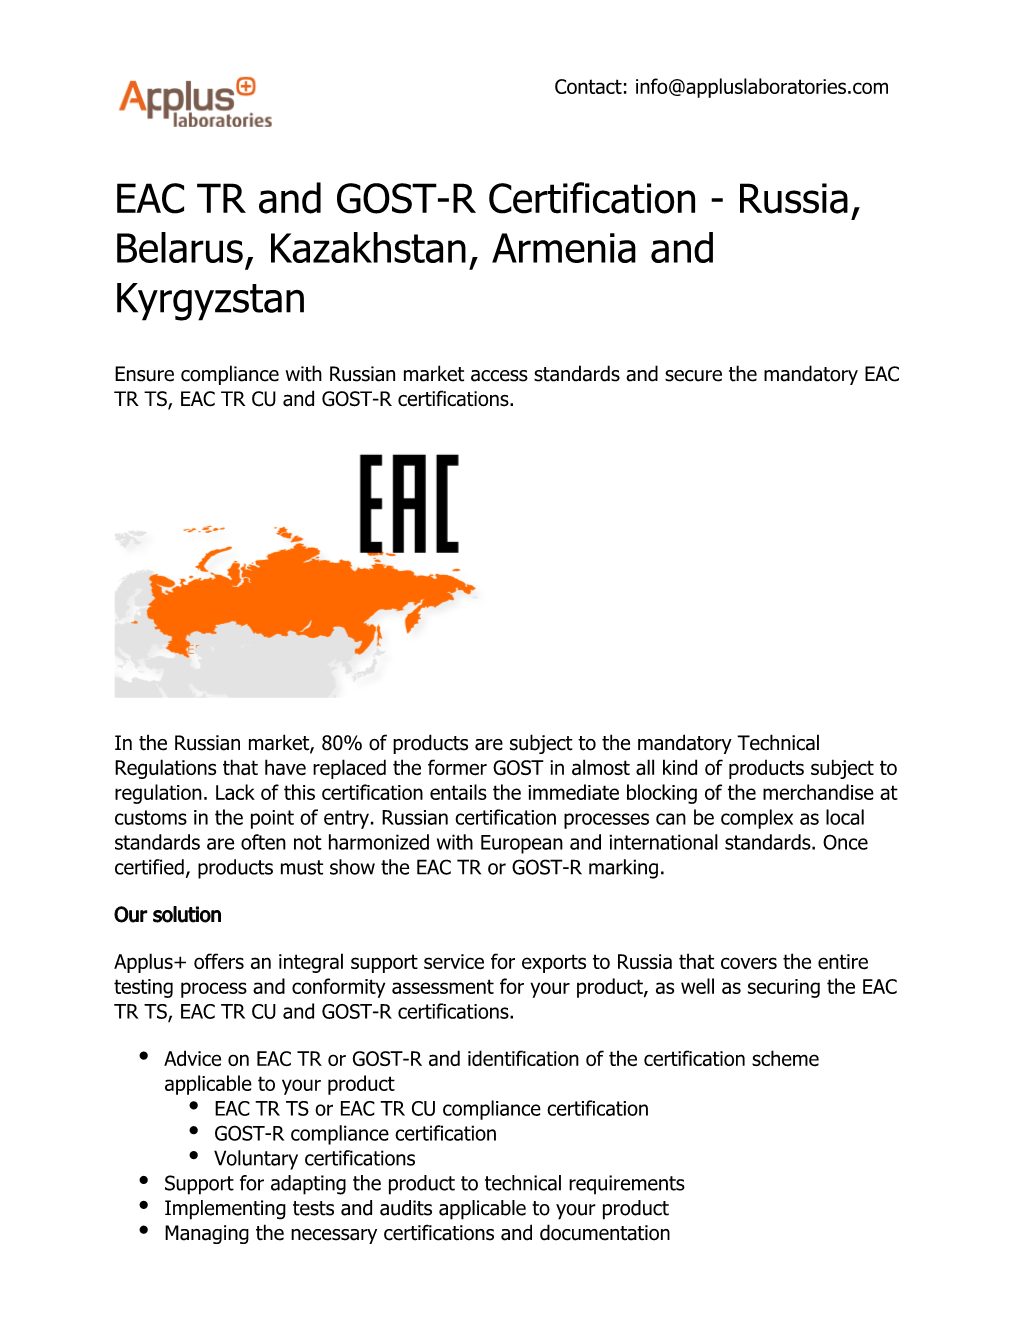 EAC TR and GOST-R Certification - Russia, Belarus, Kazakhstan, Armenia and Kyrgyzstan